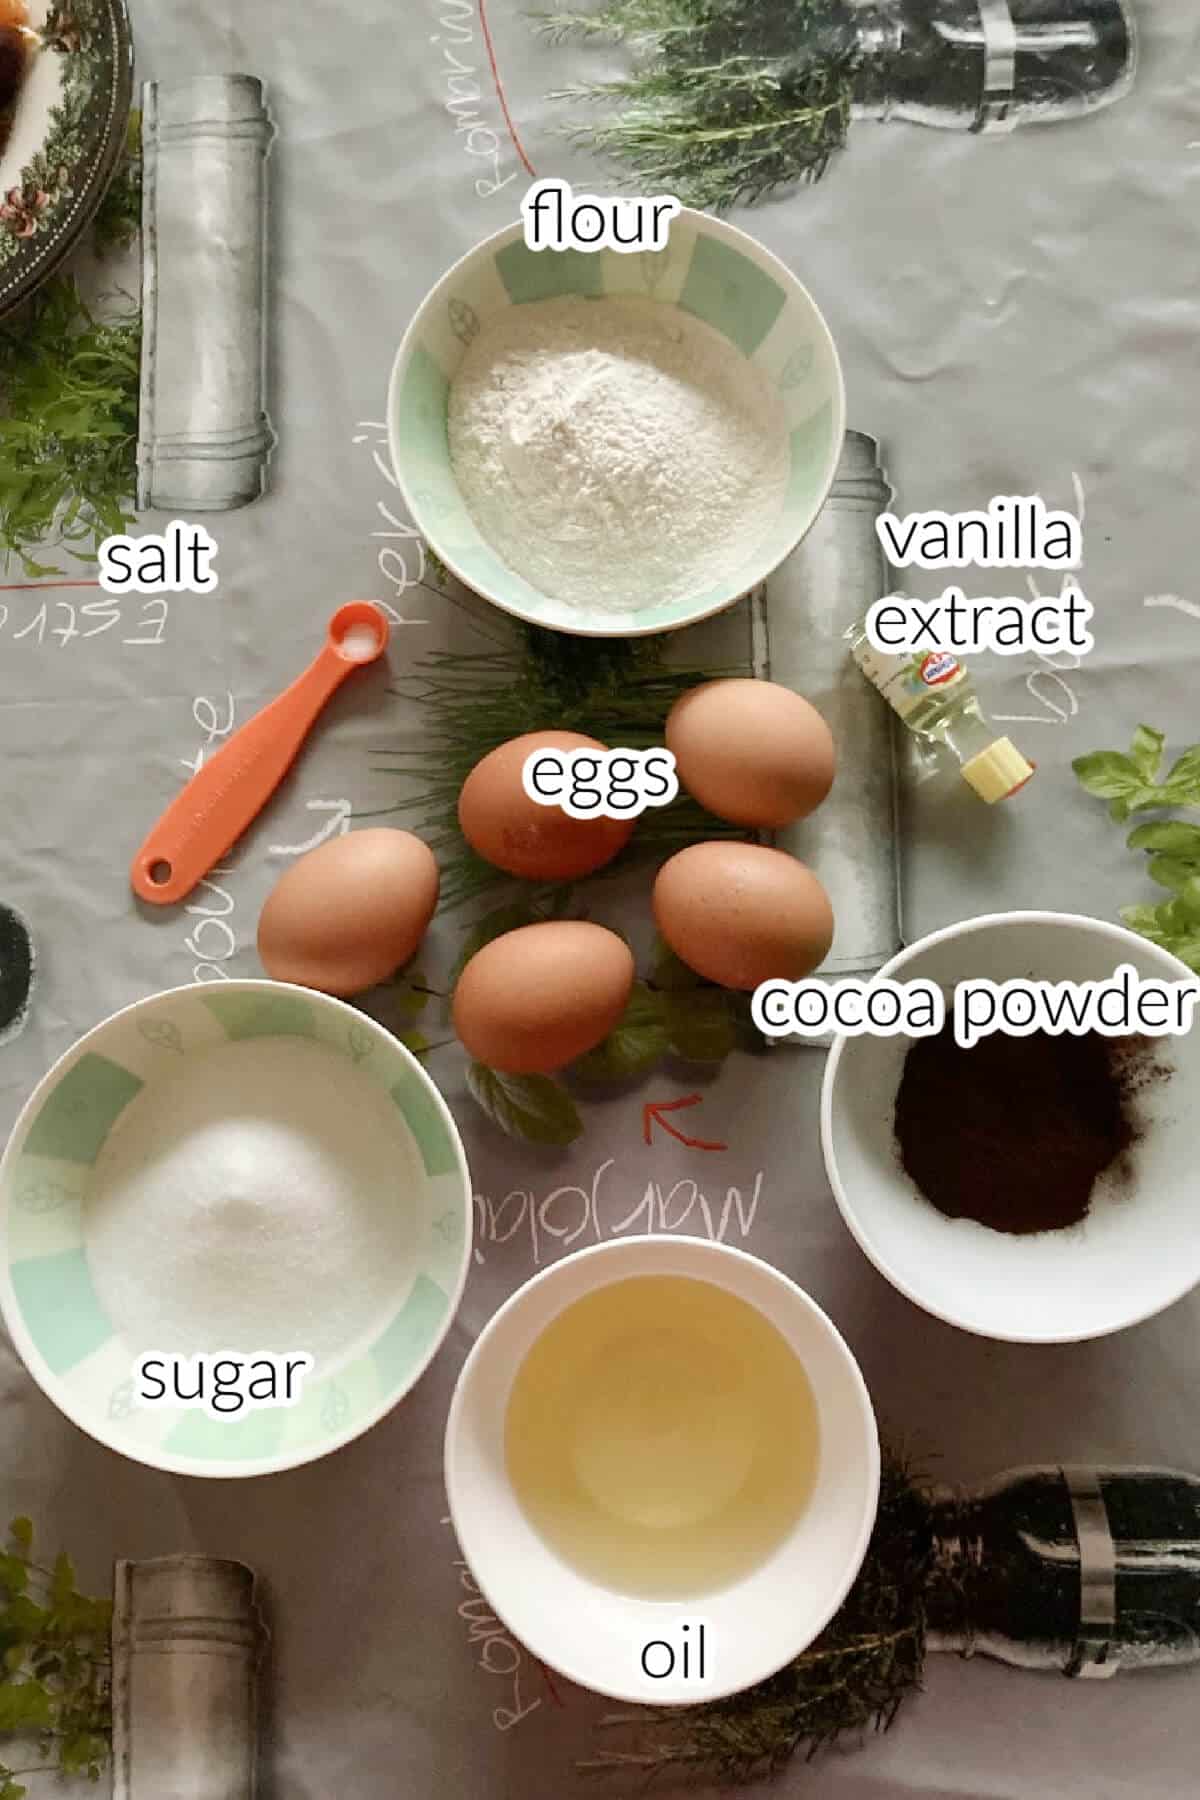 Ingredients needed to make chocolate swiss roll.